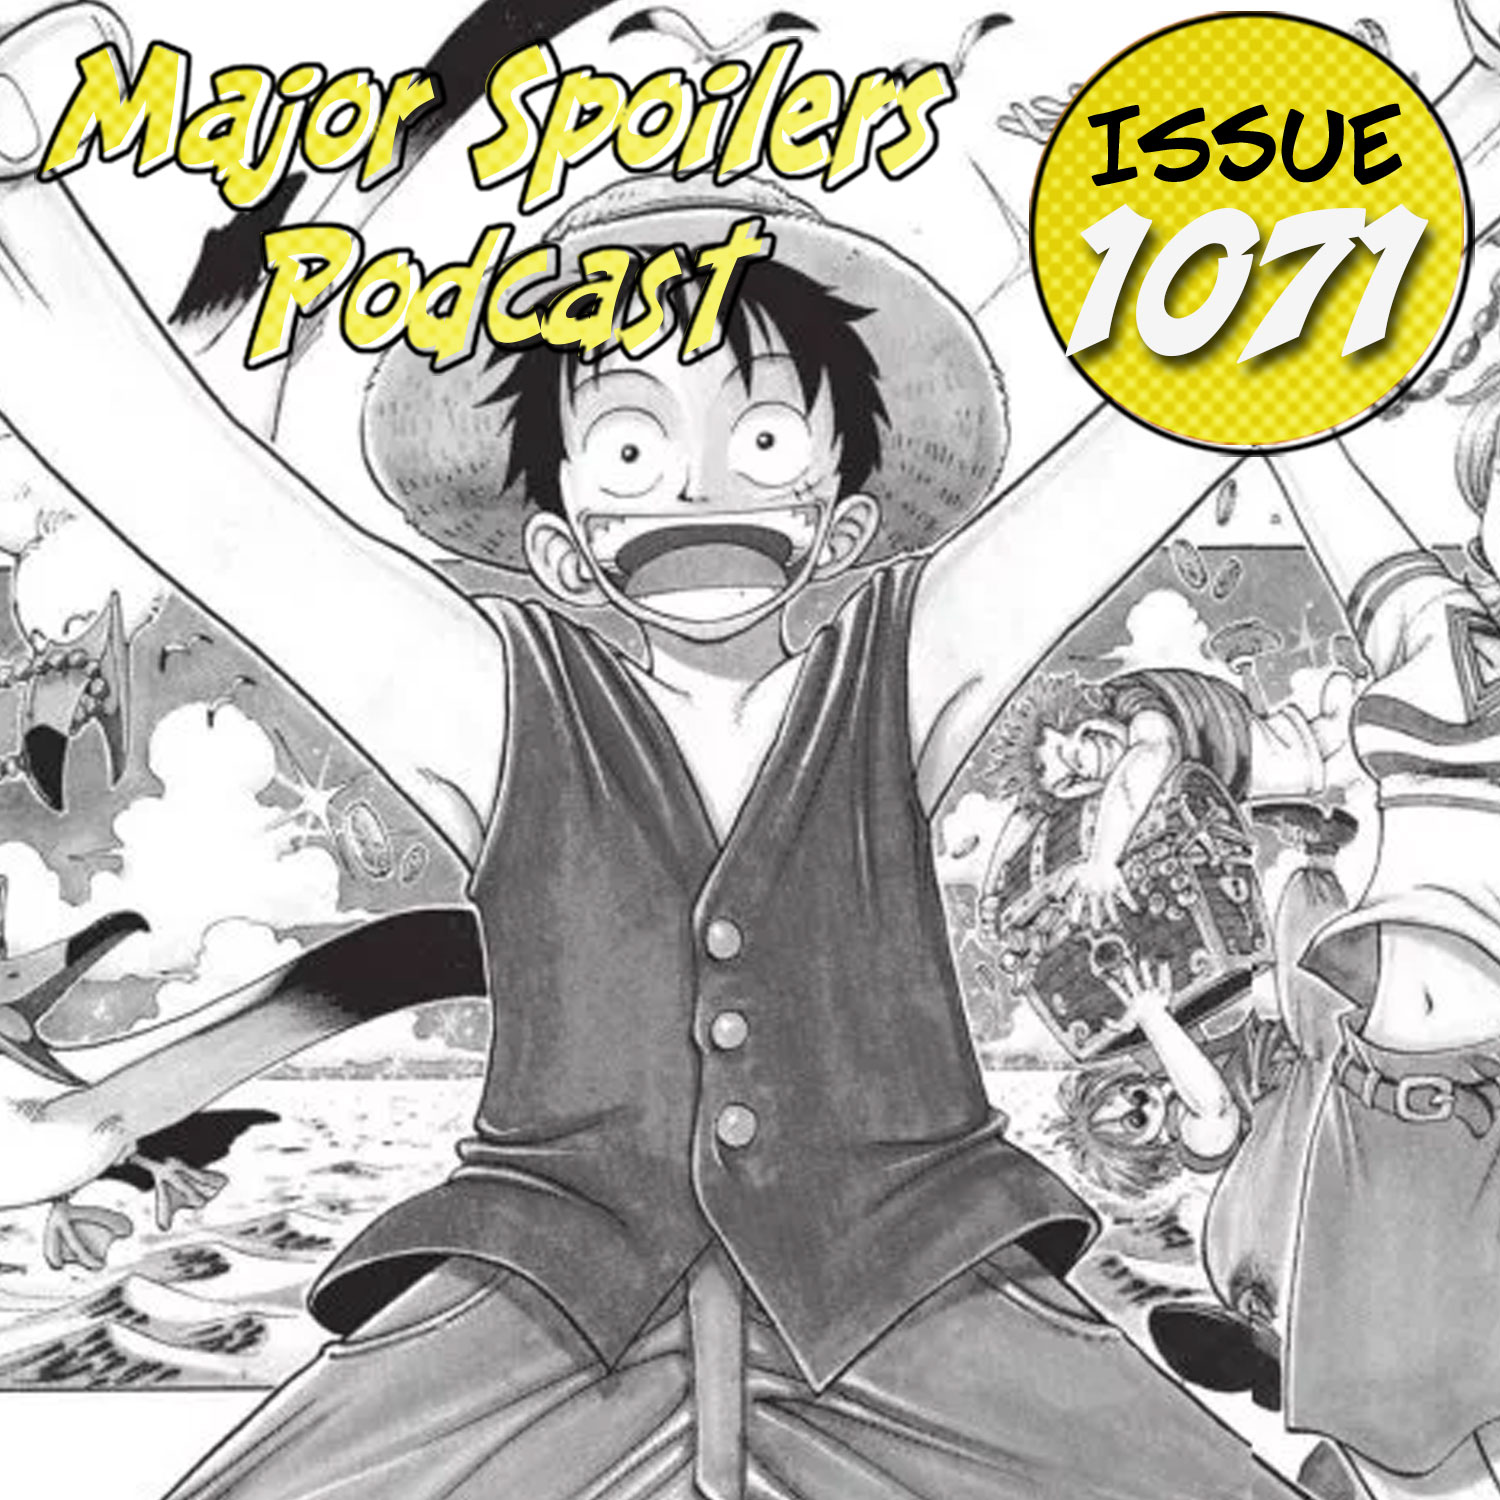 Major Spoilers Podcast #1071: The One Piece Podcast